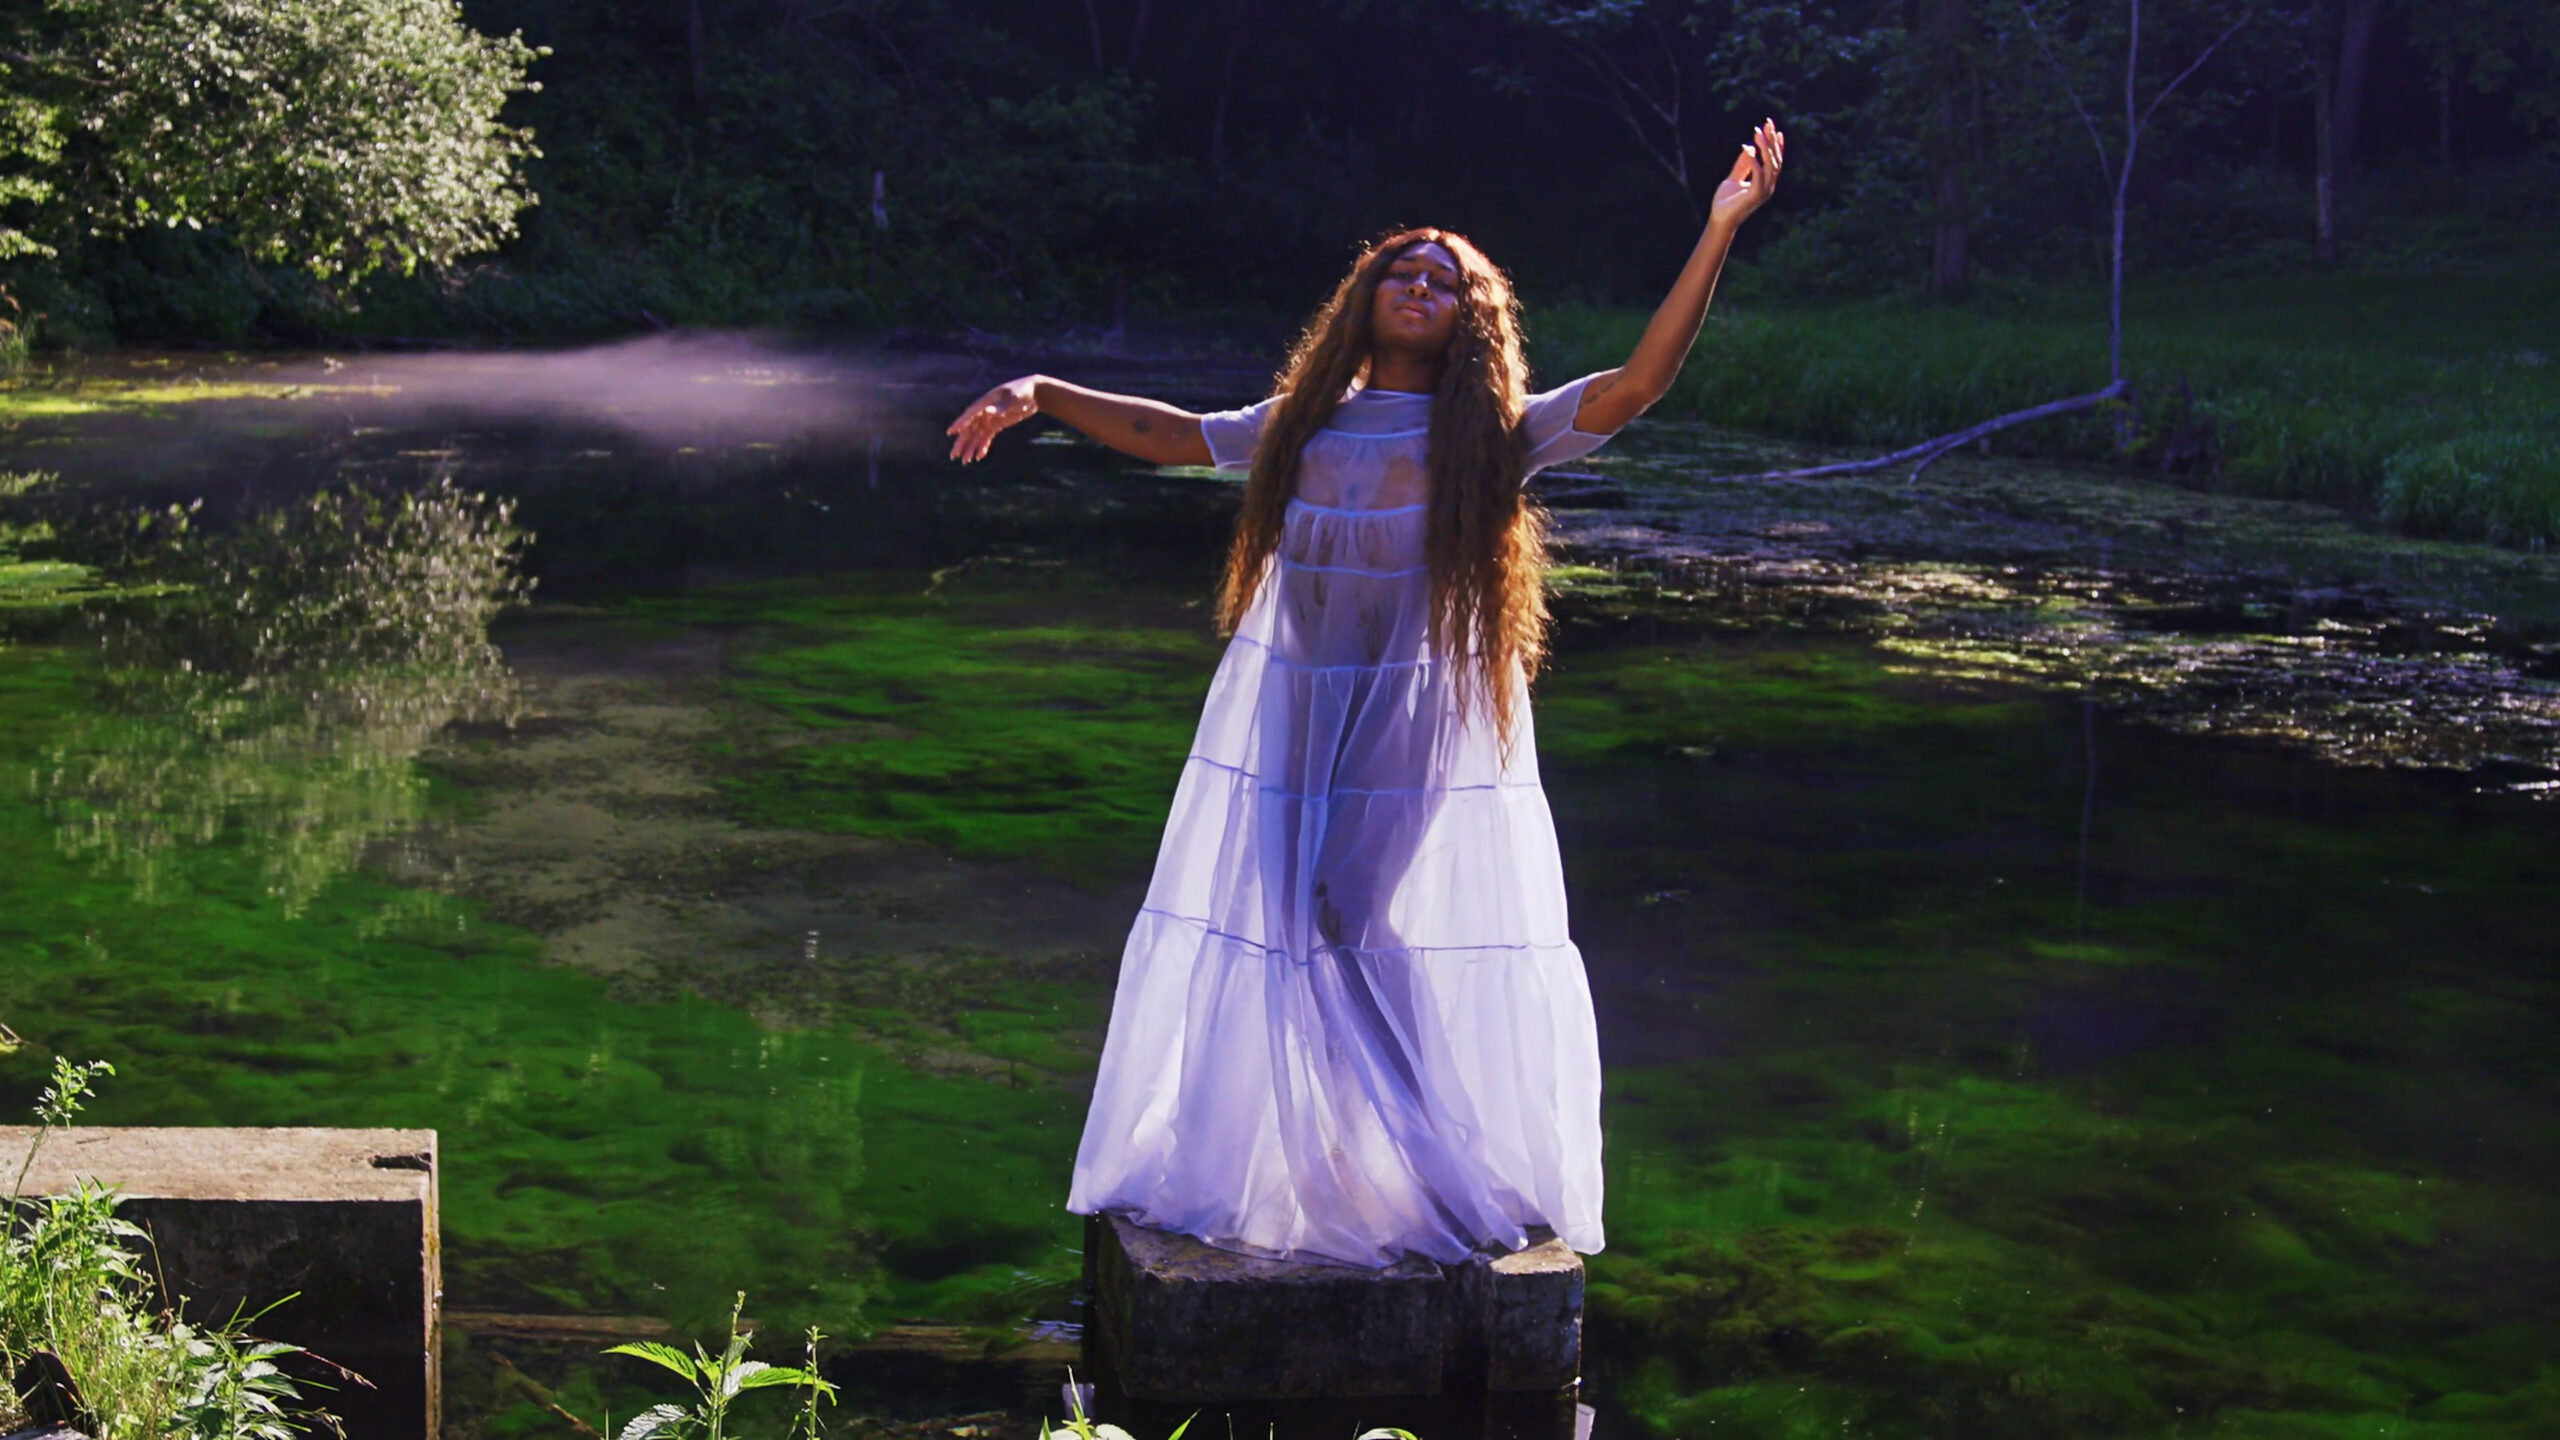 A person stands in a sheer purple full length dress on a platform in front of a backdrop of greenery and water. They have long wavy hair and their arms are outstretched.